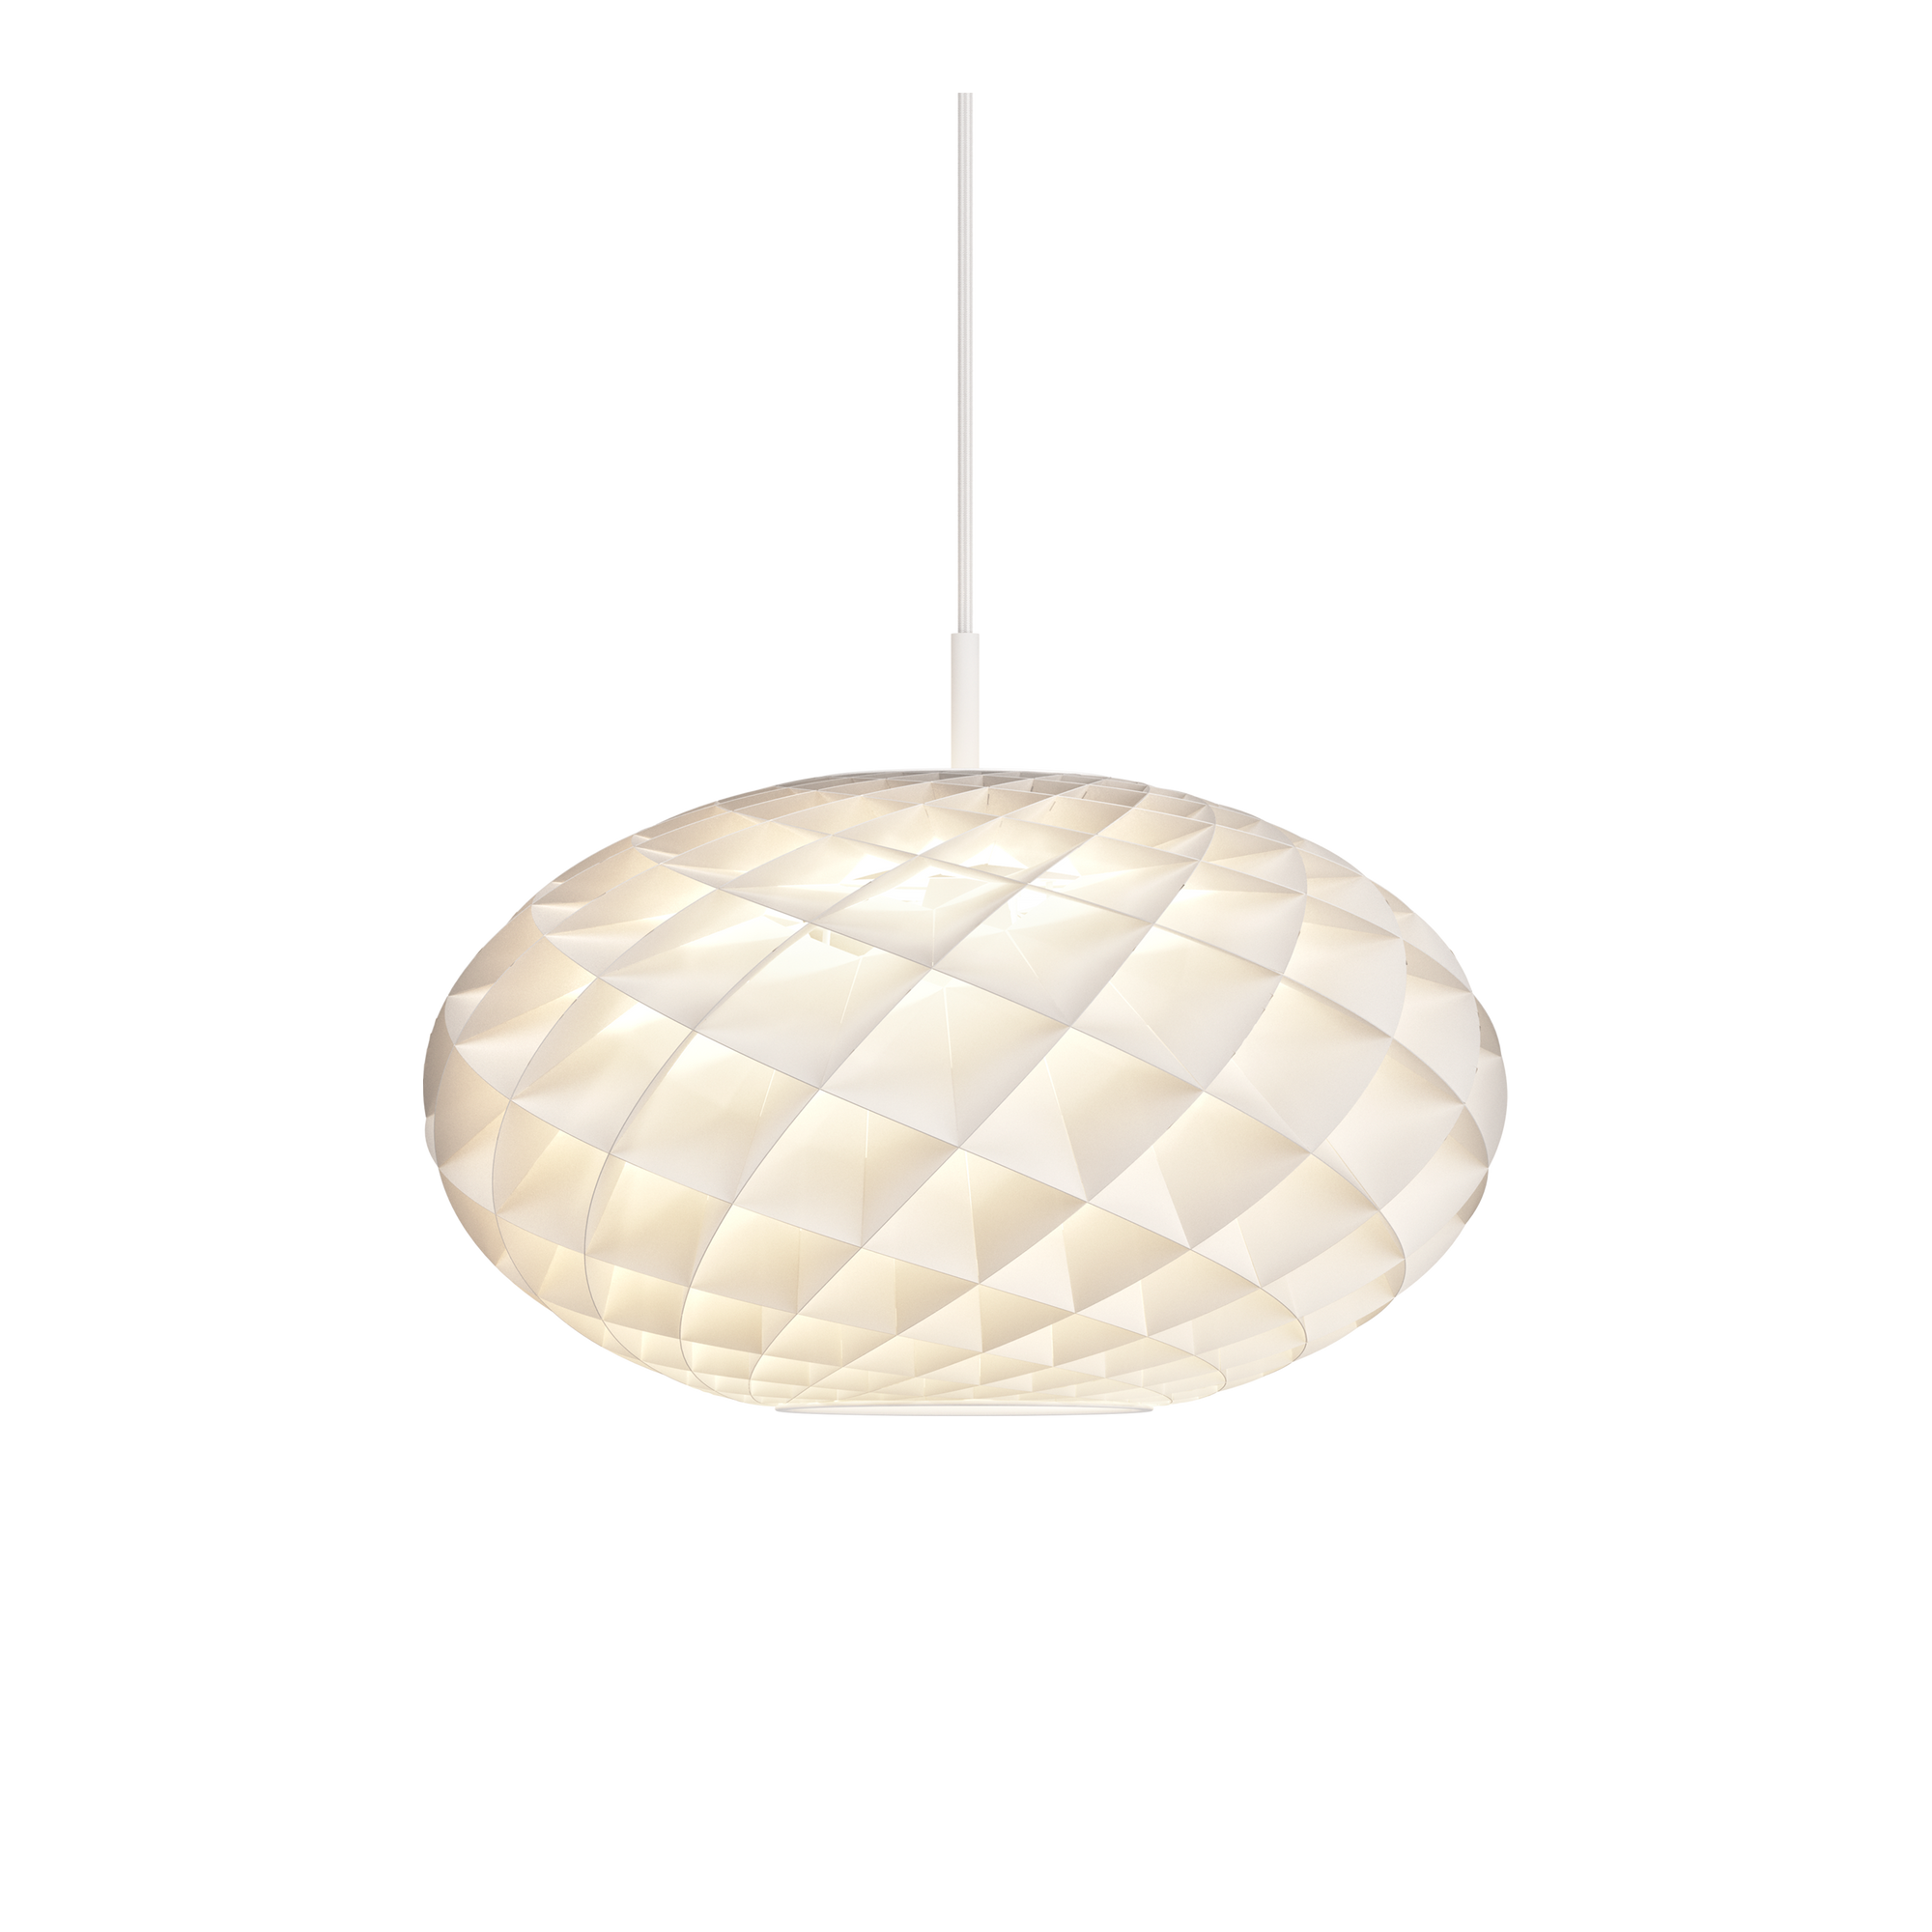 Designed by Øivind Slaatto, the Patera Oval Pendant Lamp showcases a mesmerizing geometric design inspired by the Fibonacci sequence and the intricate structure of nature.